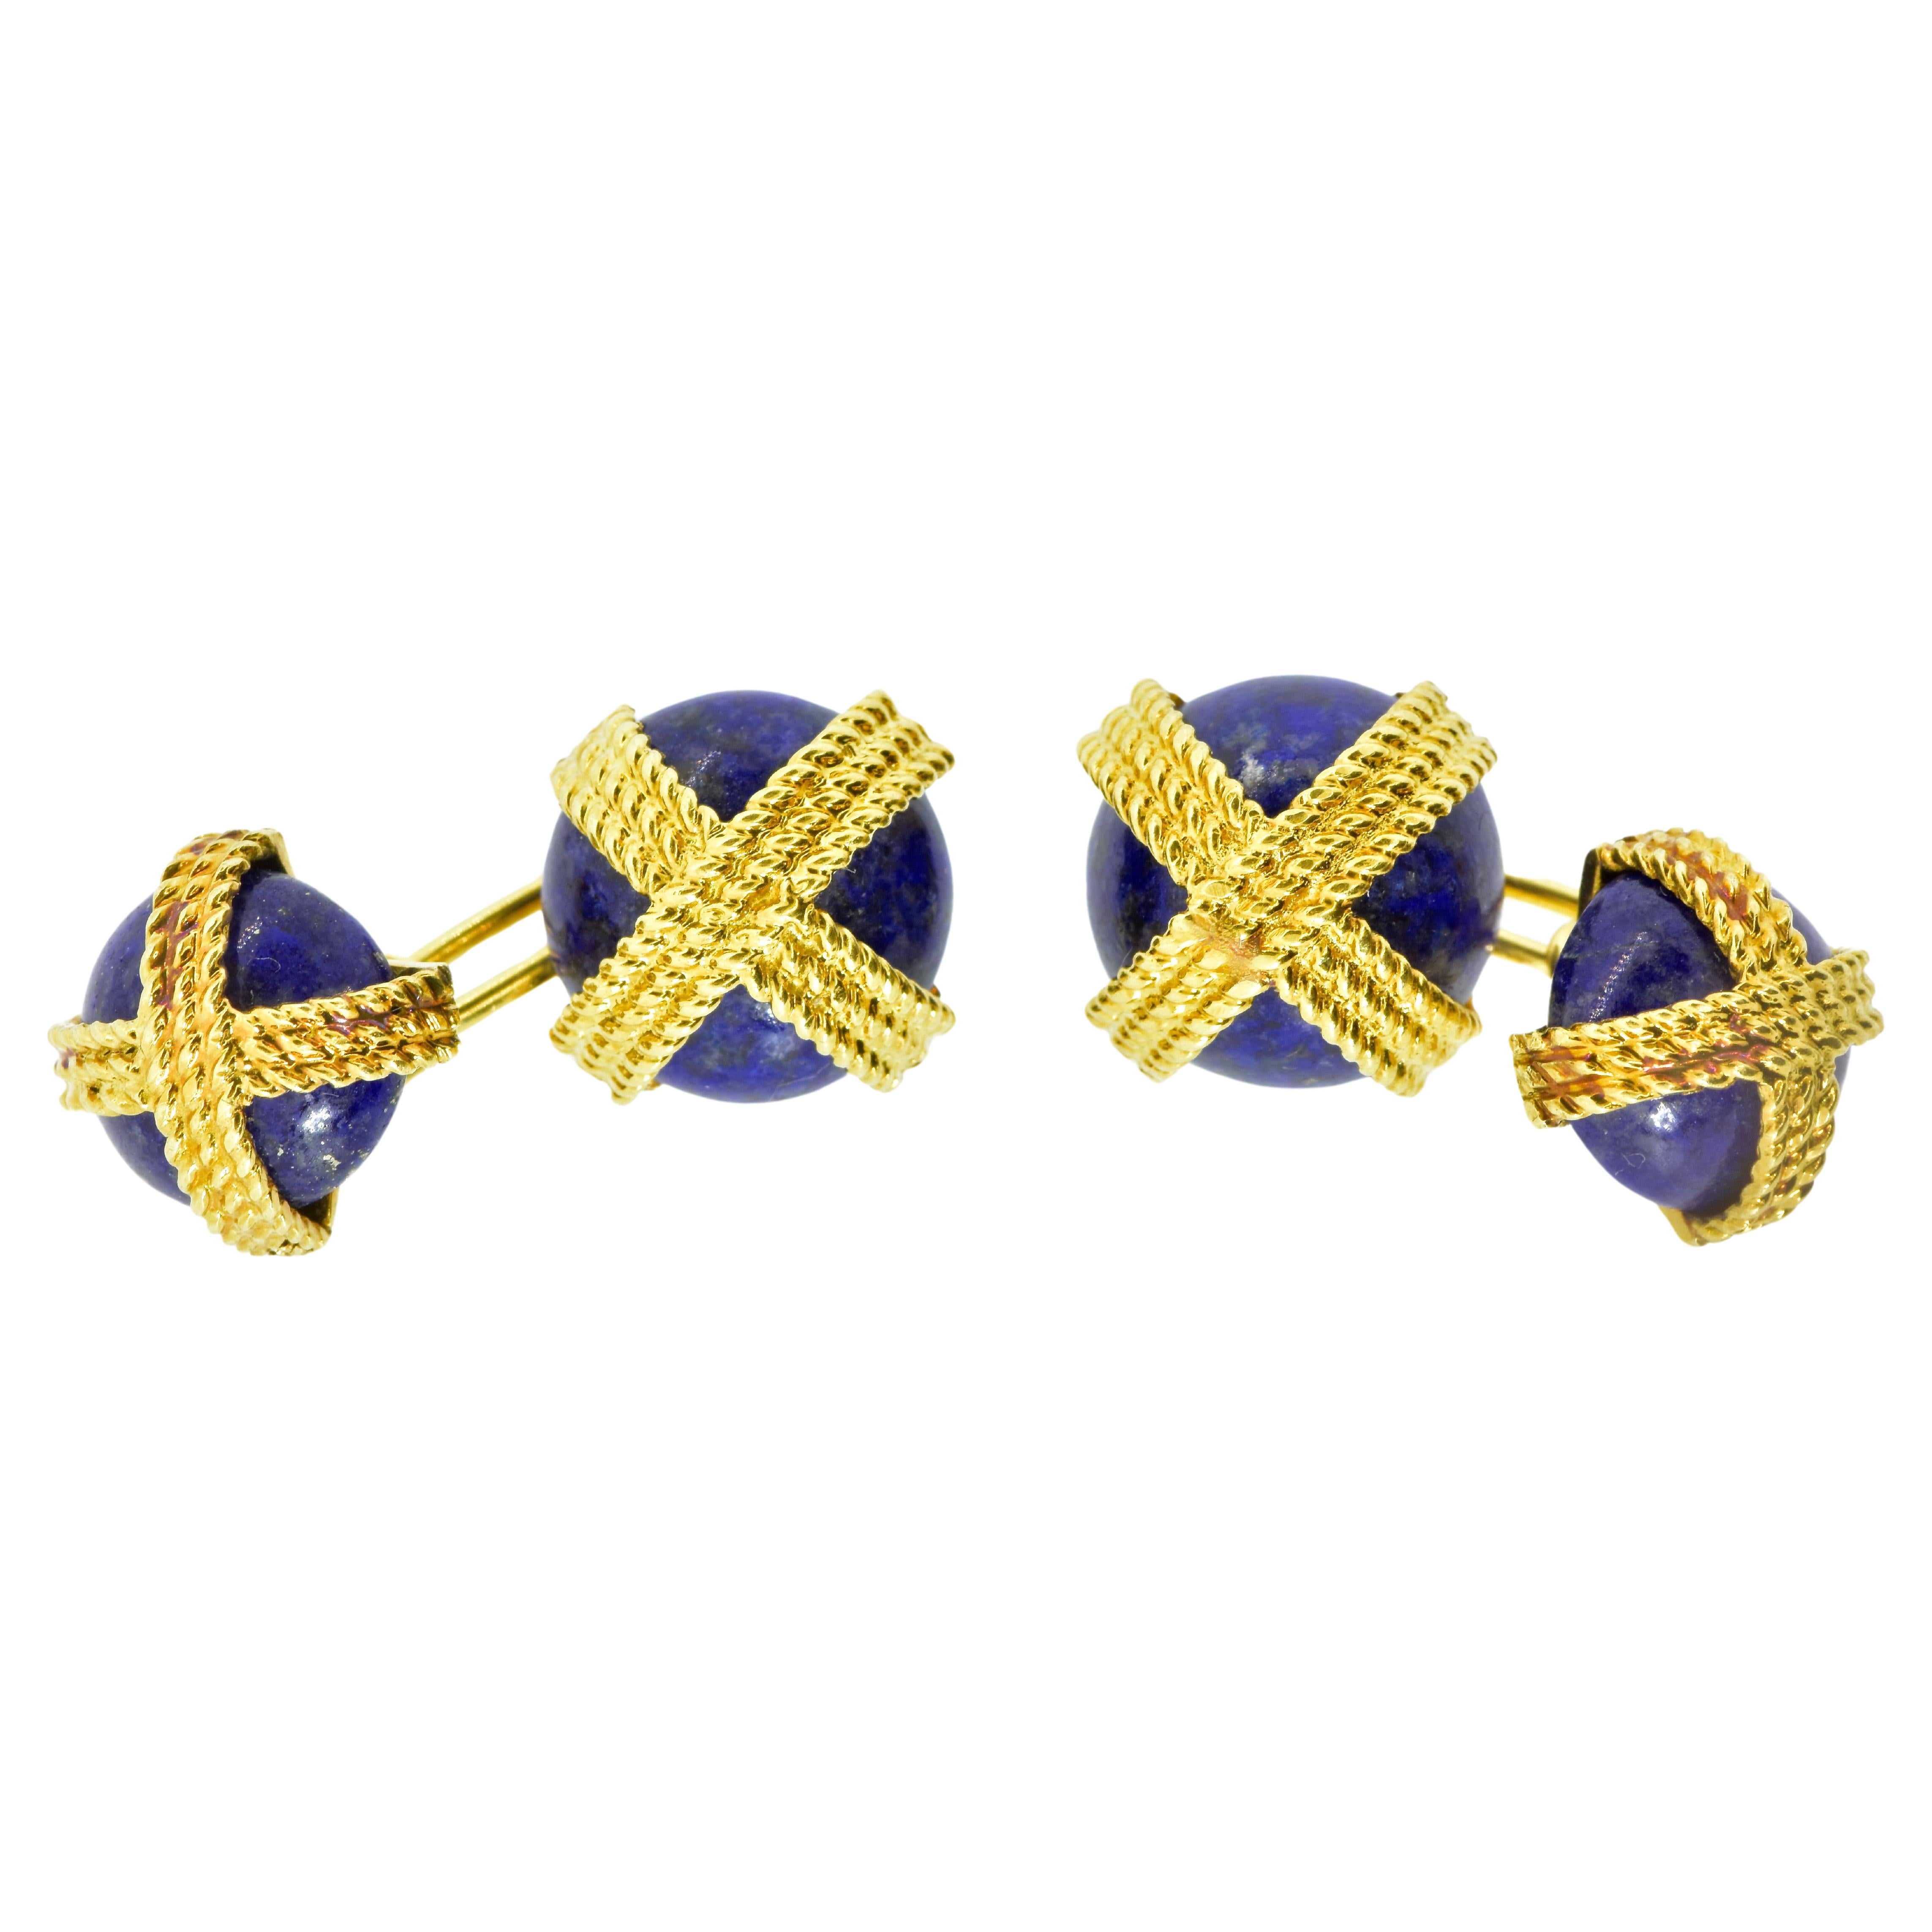 Van Cleef & Arpels Cufflinks 18K yellow gold and fine natural lapis and  back to back. Secured by tightly woven bands of boldly textured 18K gold, the 4 stones of lapis all match well in their vivid blue color.  Usually we see this cufflink in black